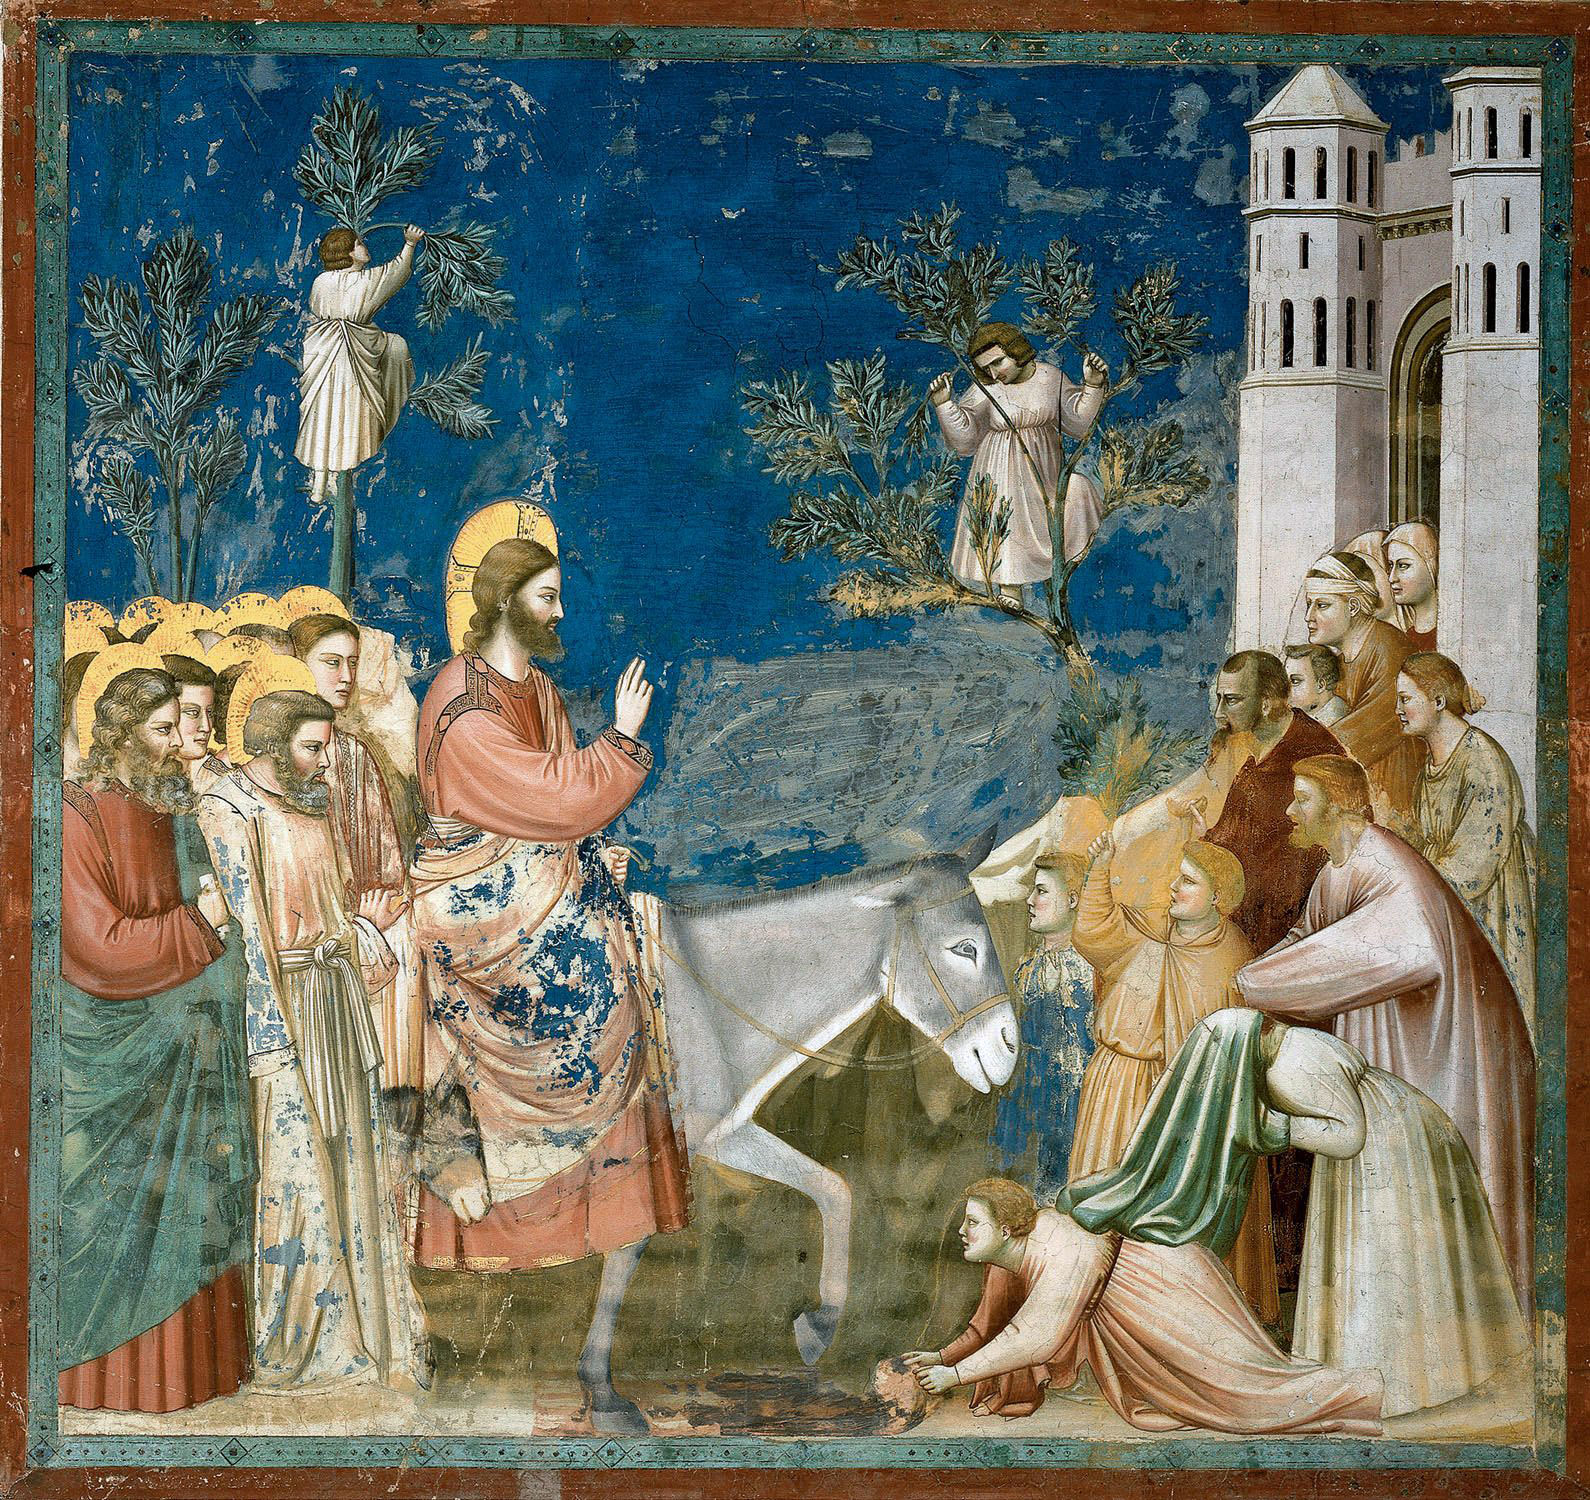 The Entry into Jerusalem, 14th century painting by Giotto (c.1267-1337).